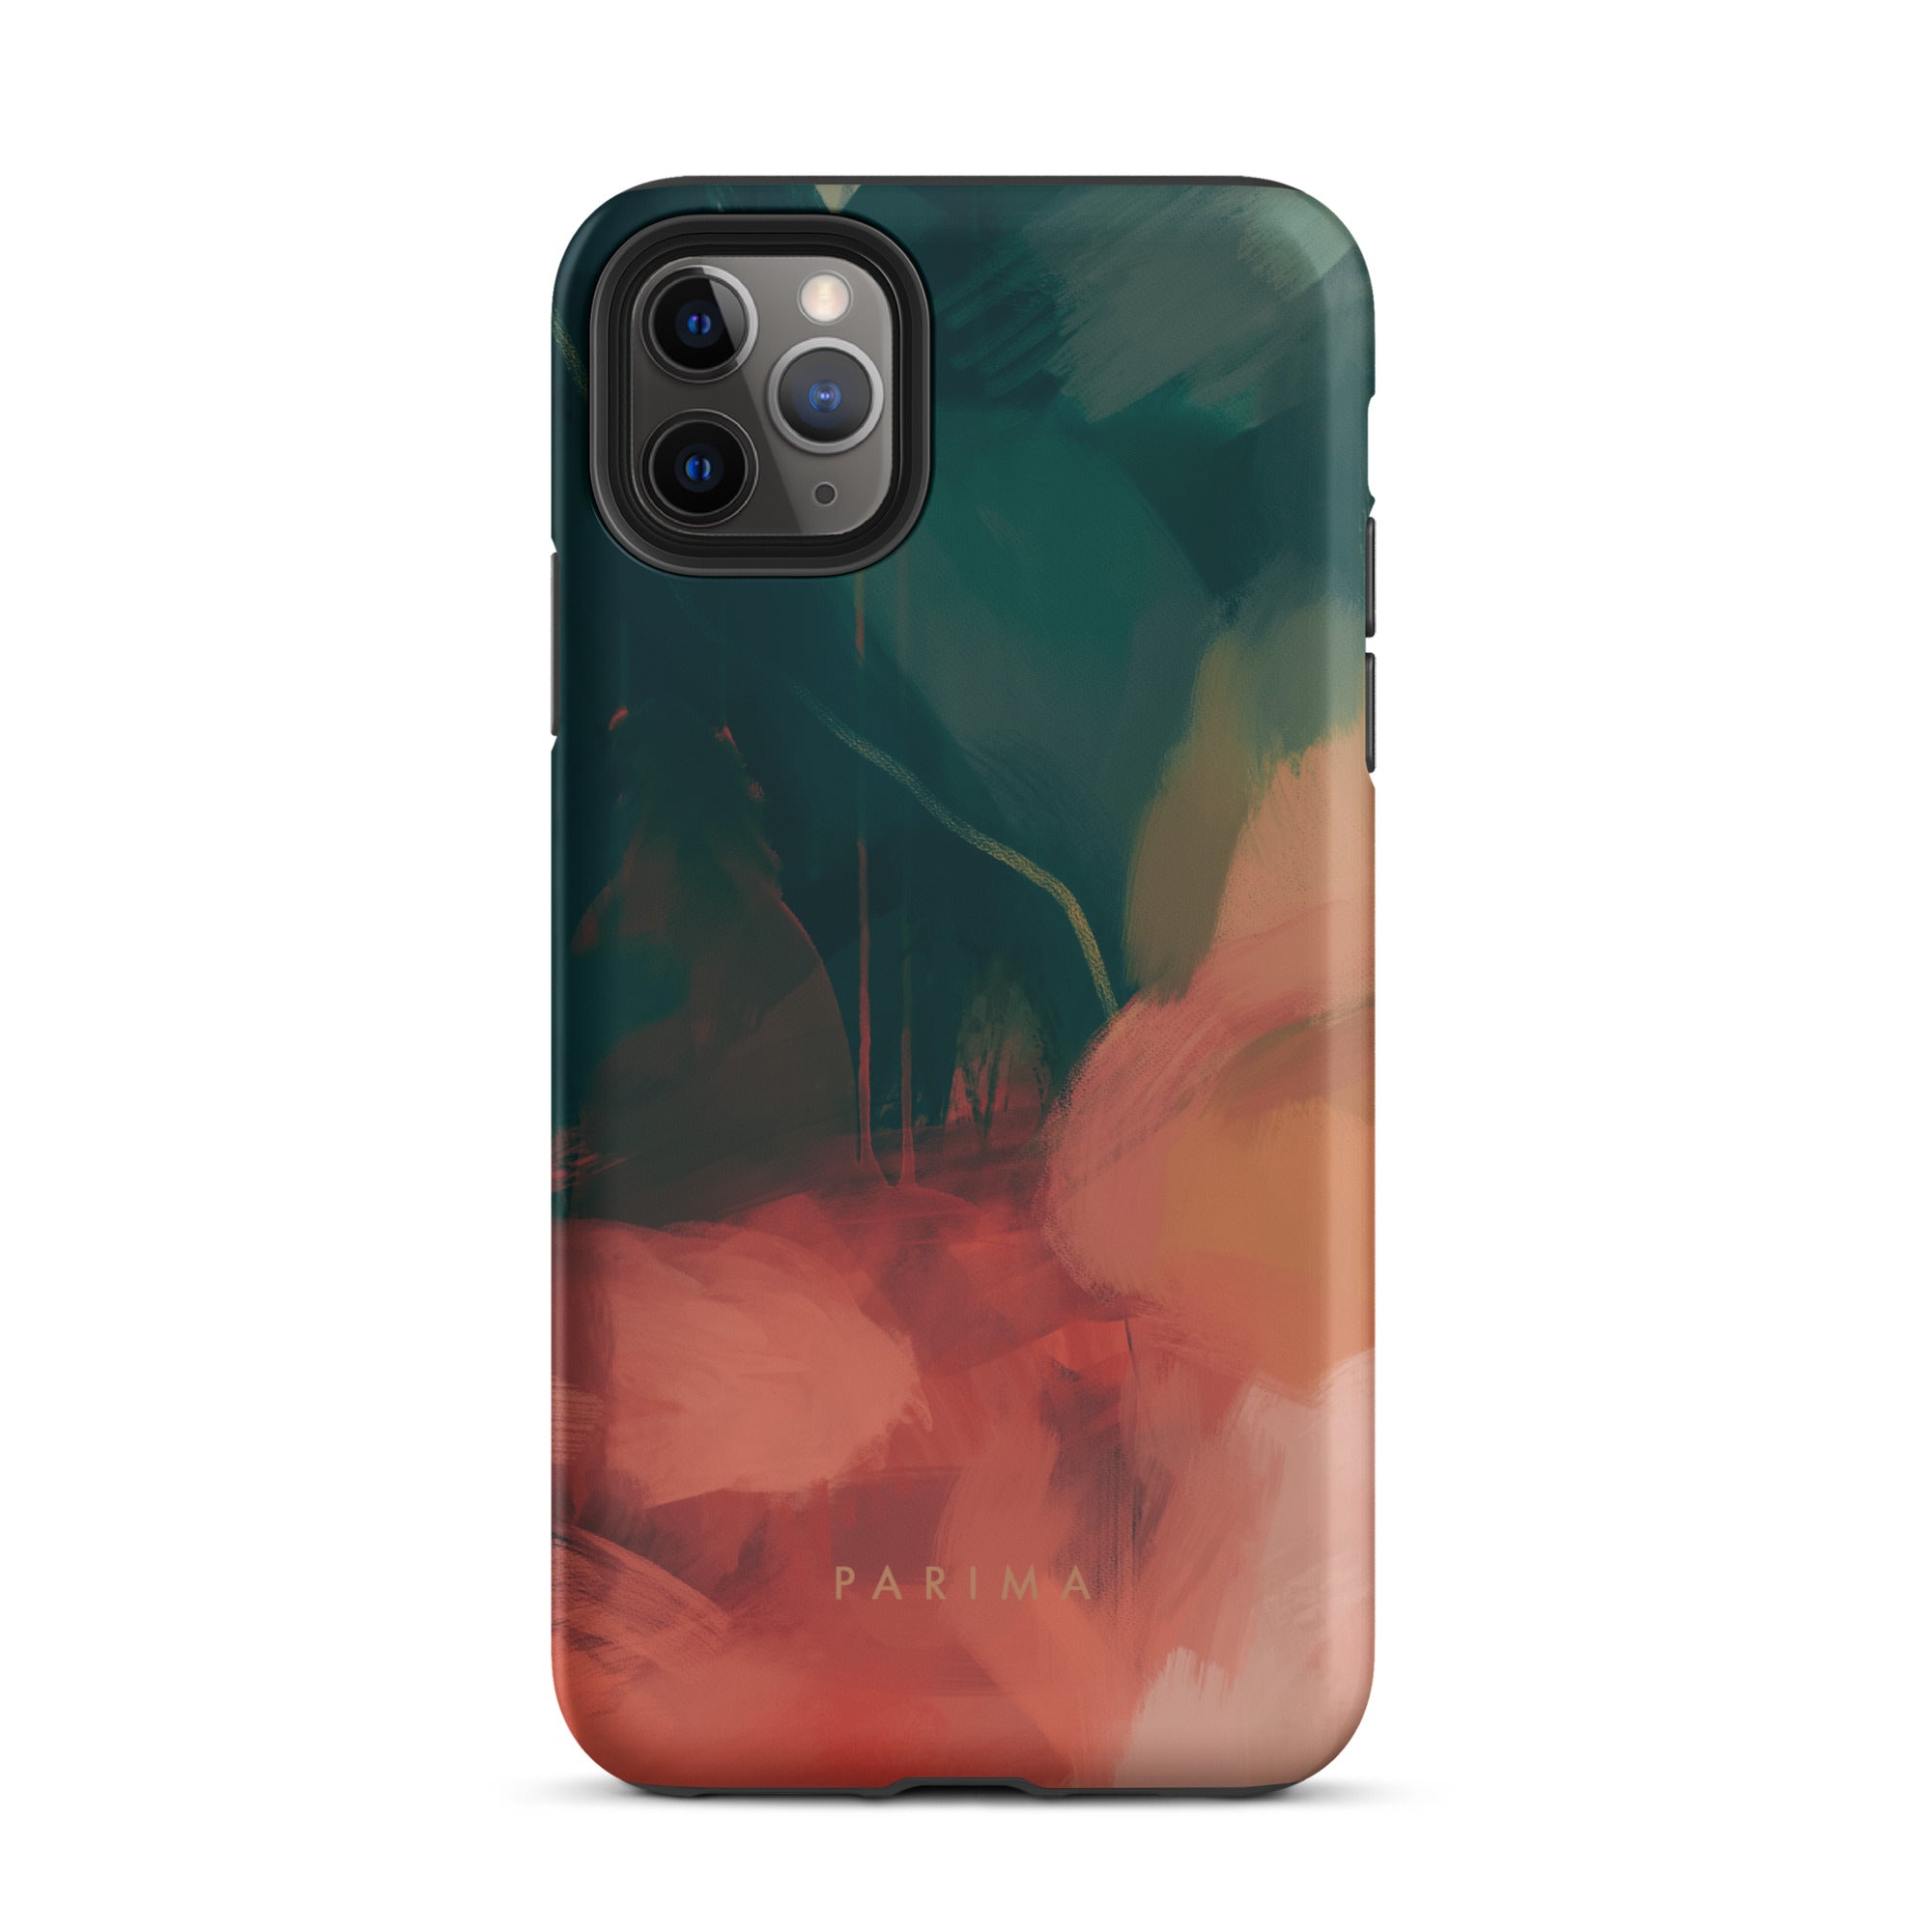 Eventide, green and red abstract art - iPhone 11 Pro Max tough case by Parima Studio